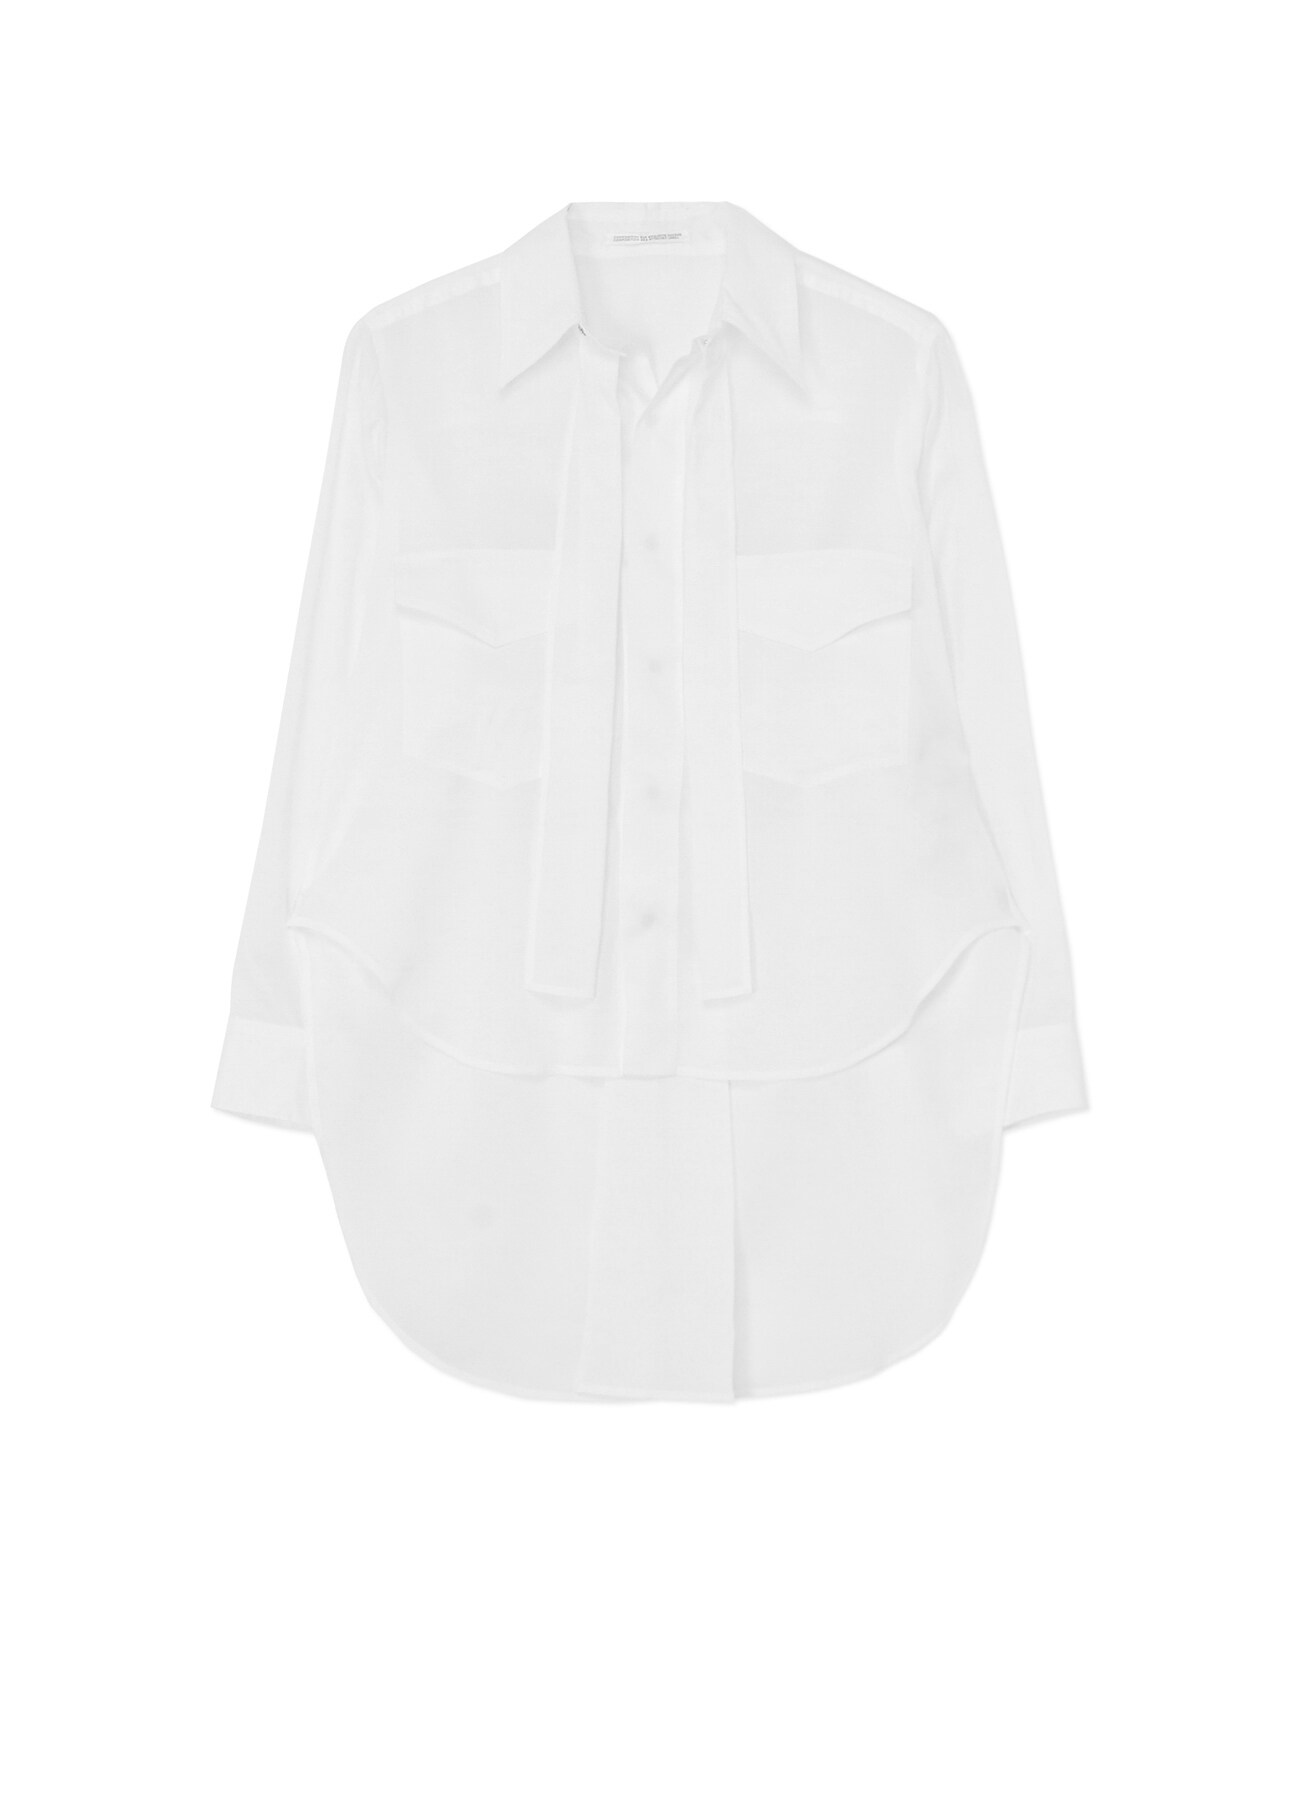 CELLULOSE LAWN SHIRT WITH TIE